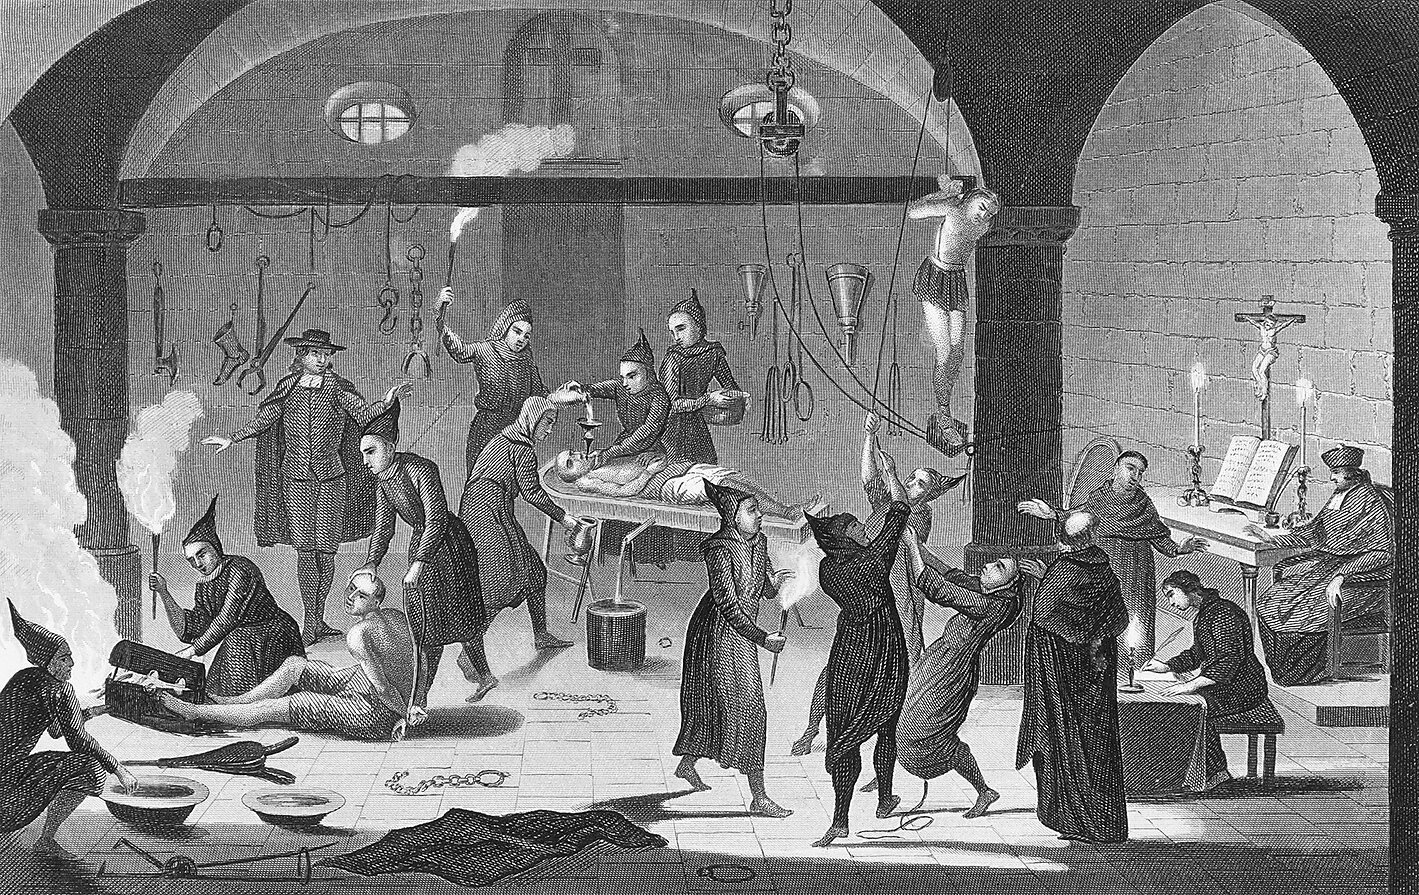 Illustration Depicting Torture during the Inquisition